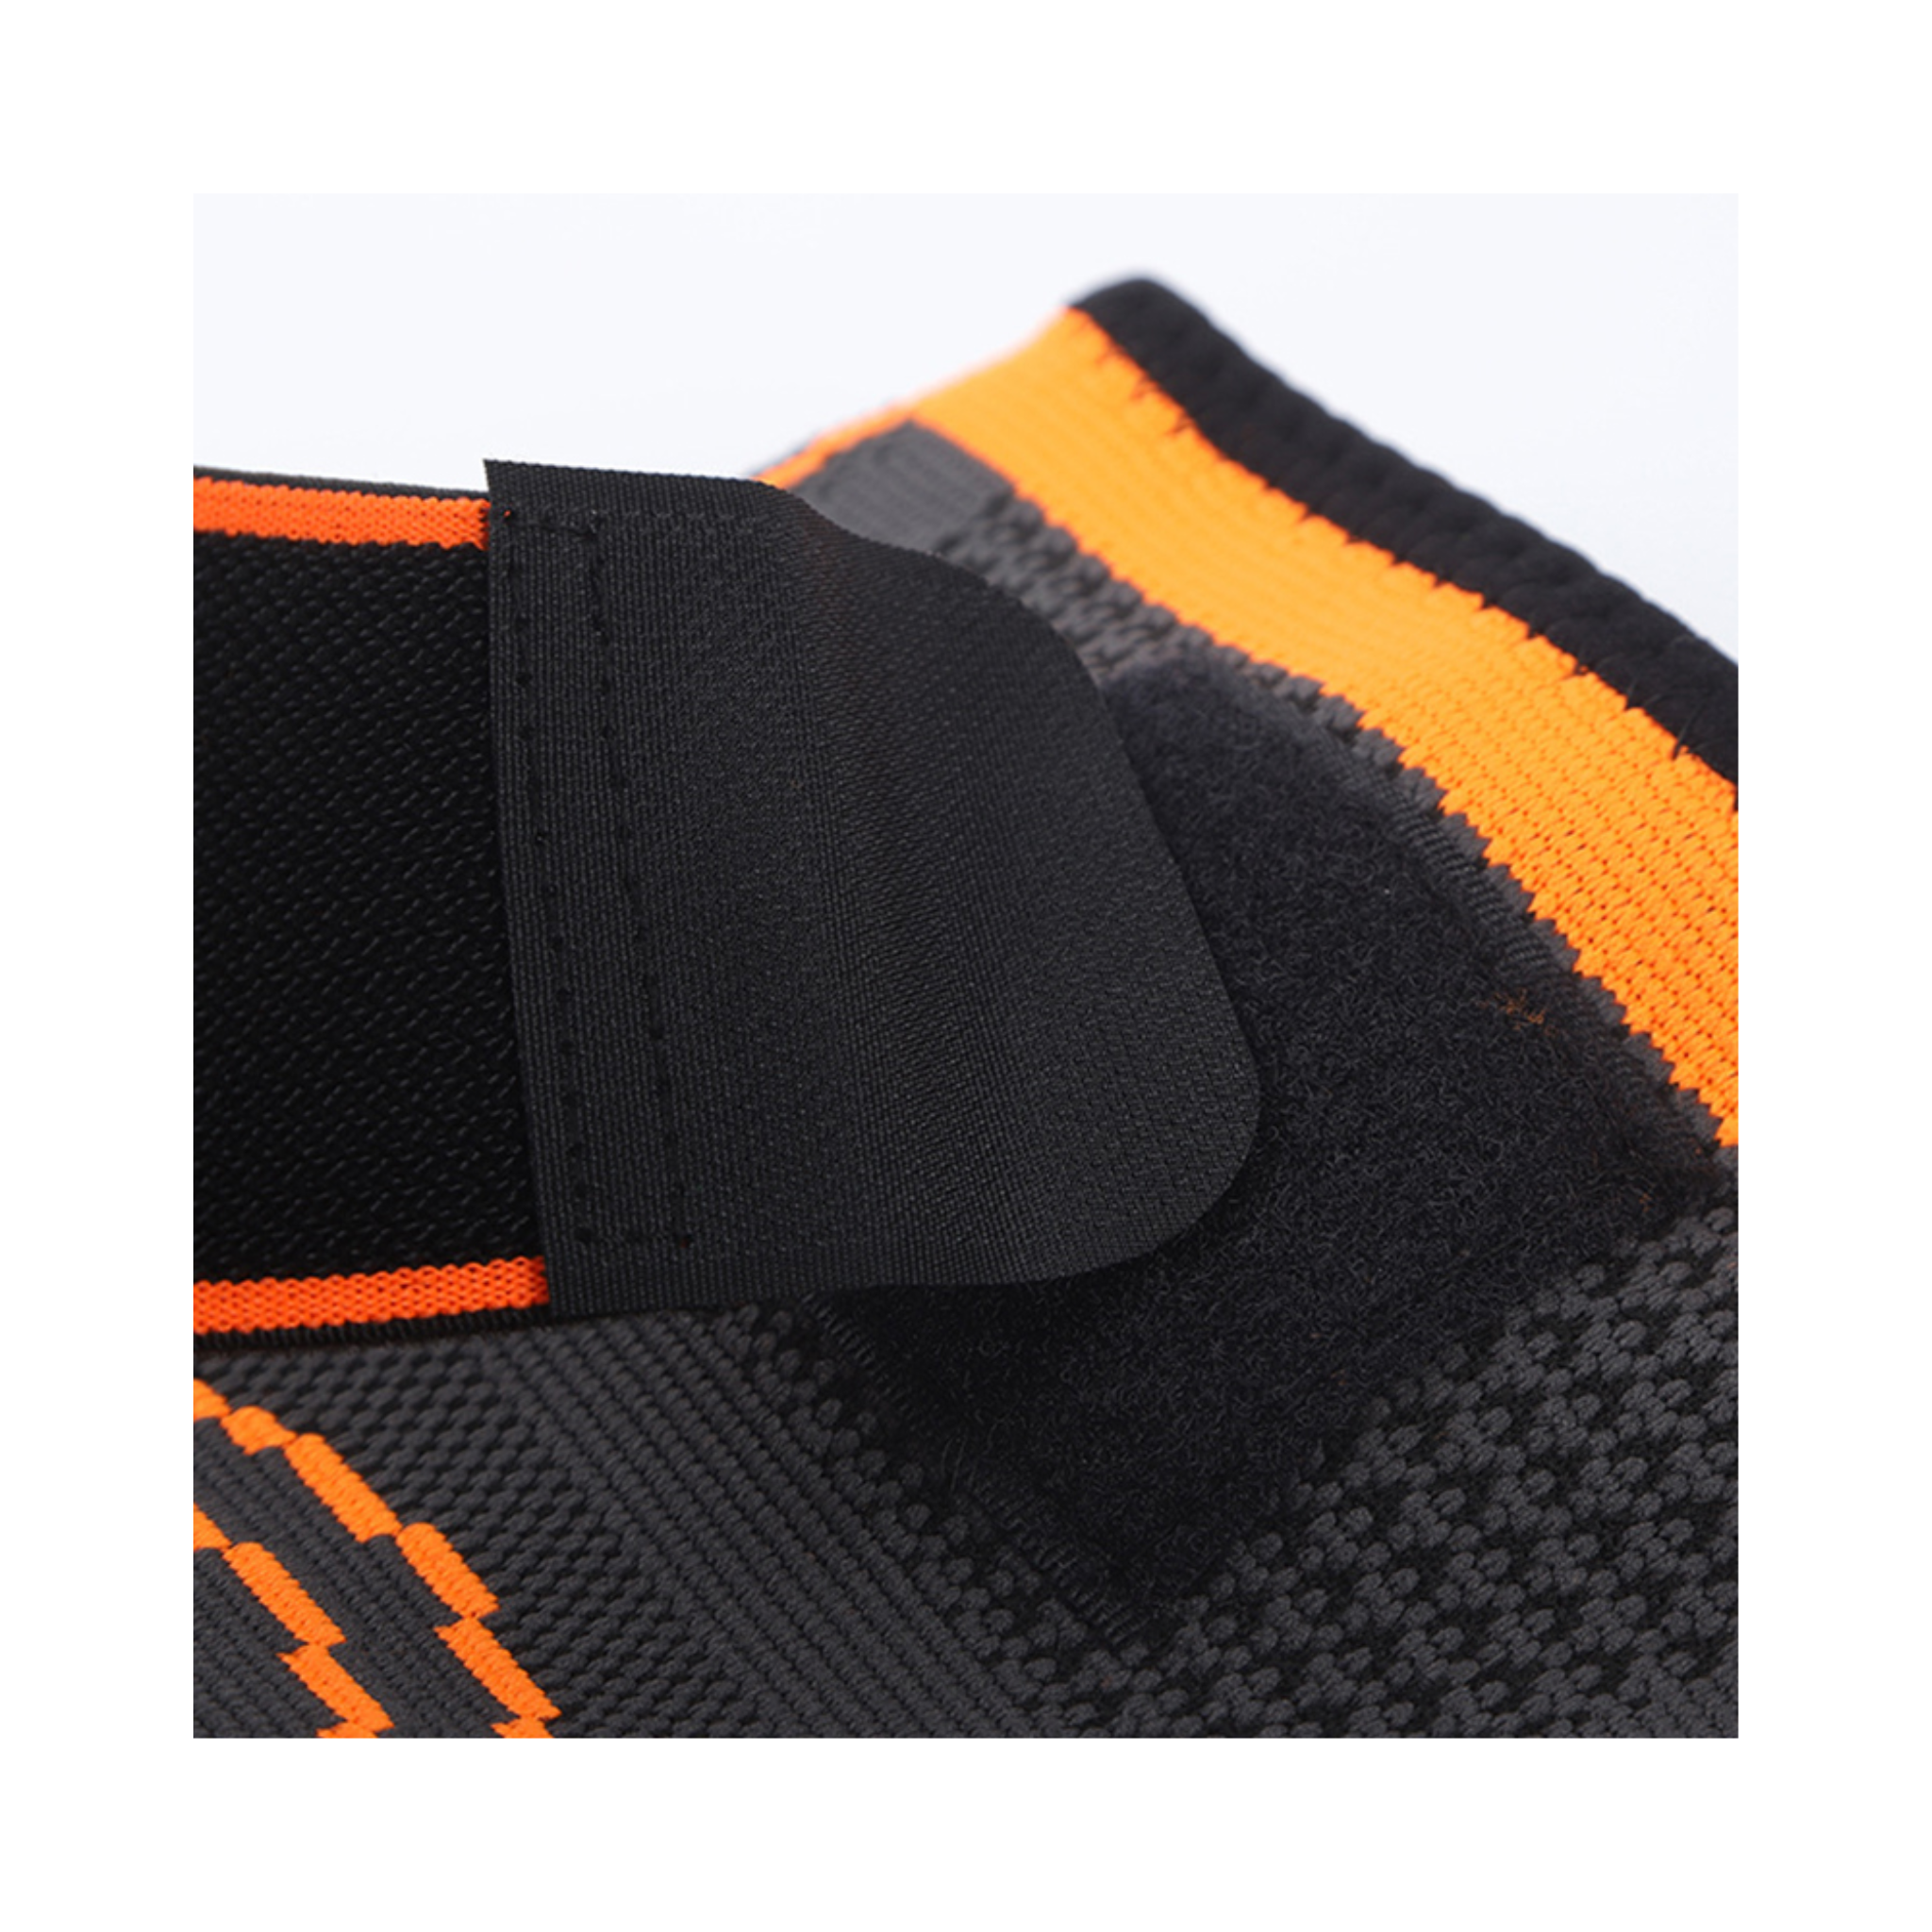 Knee Pads, Protector Sports Braces, for Unisex